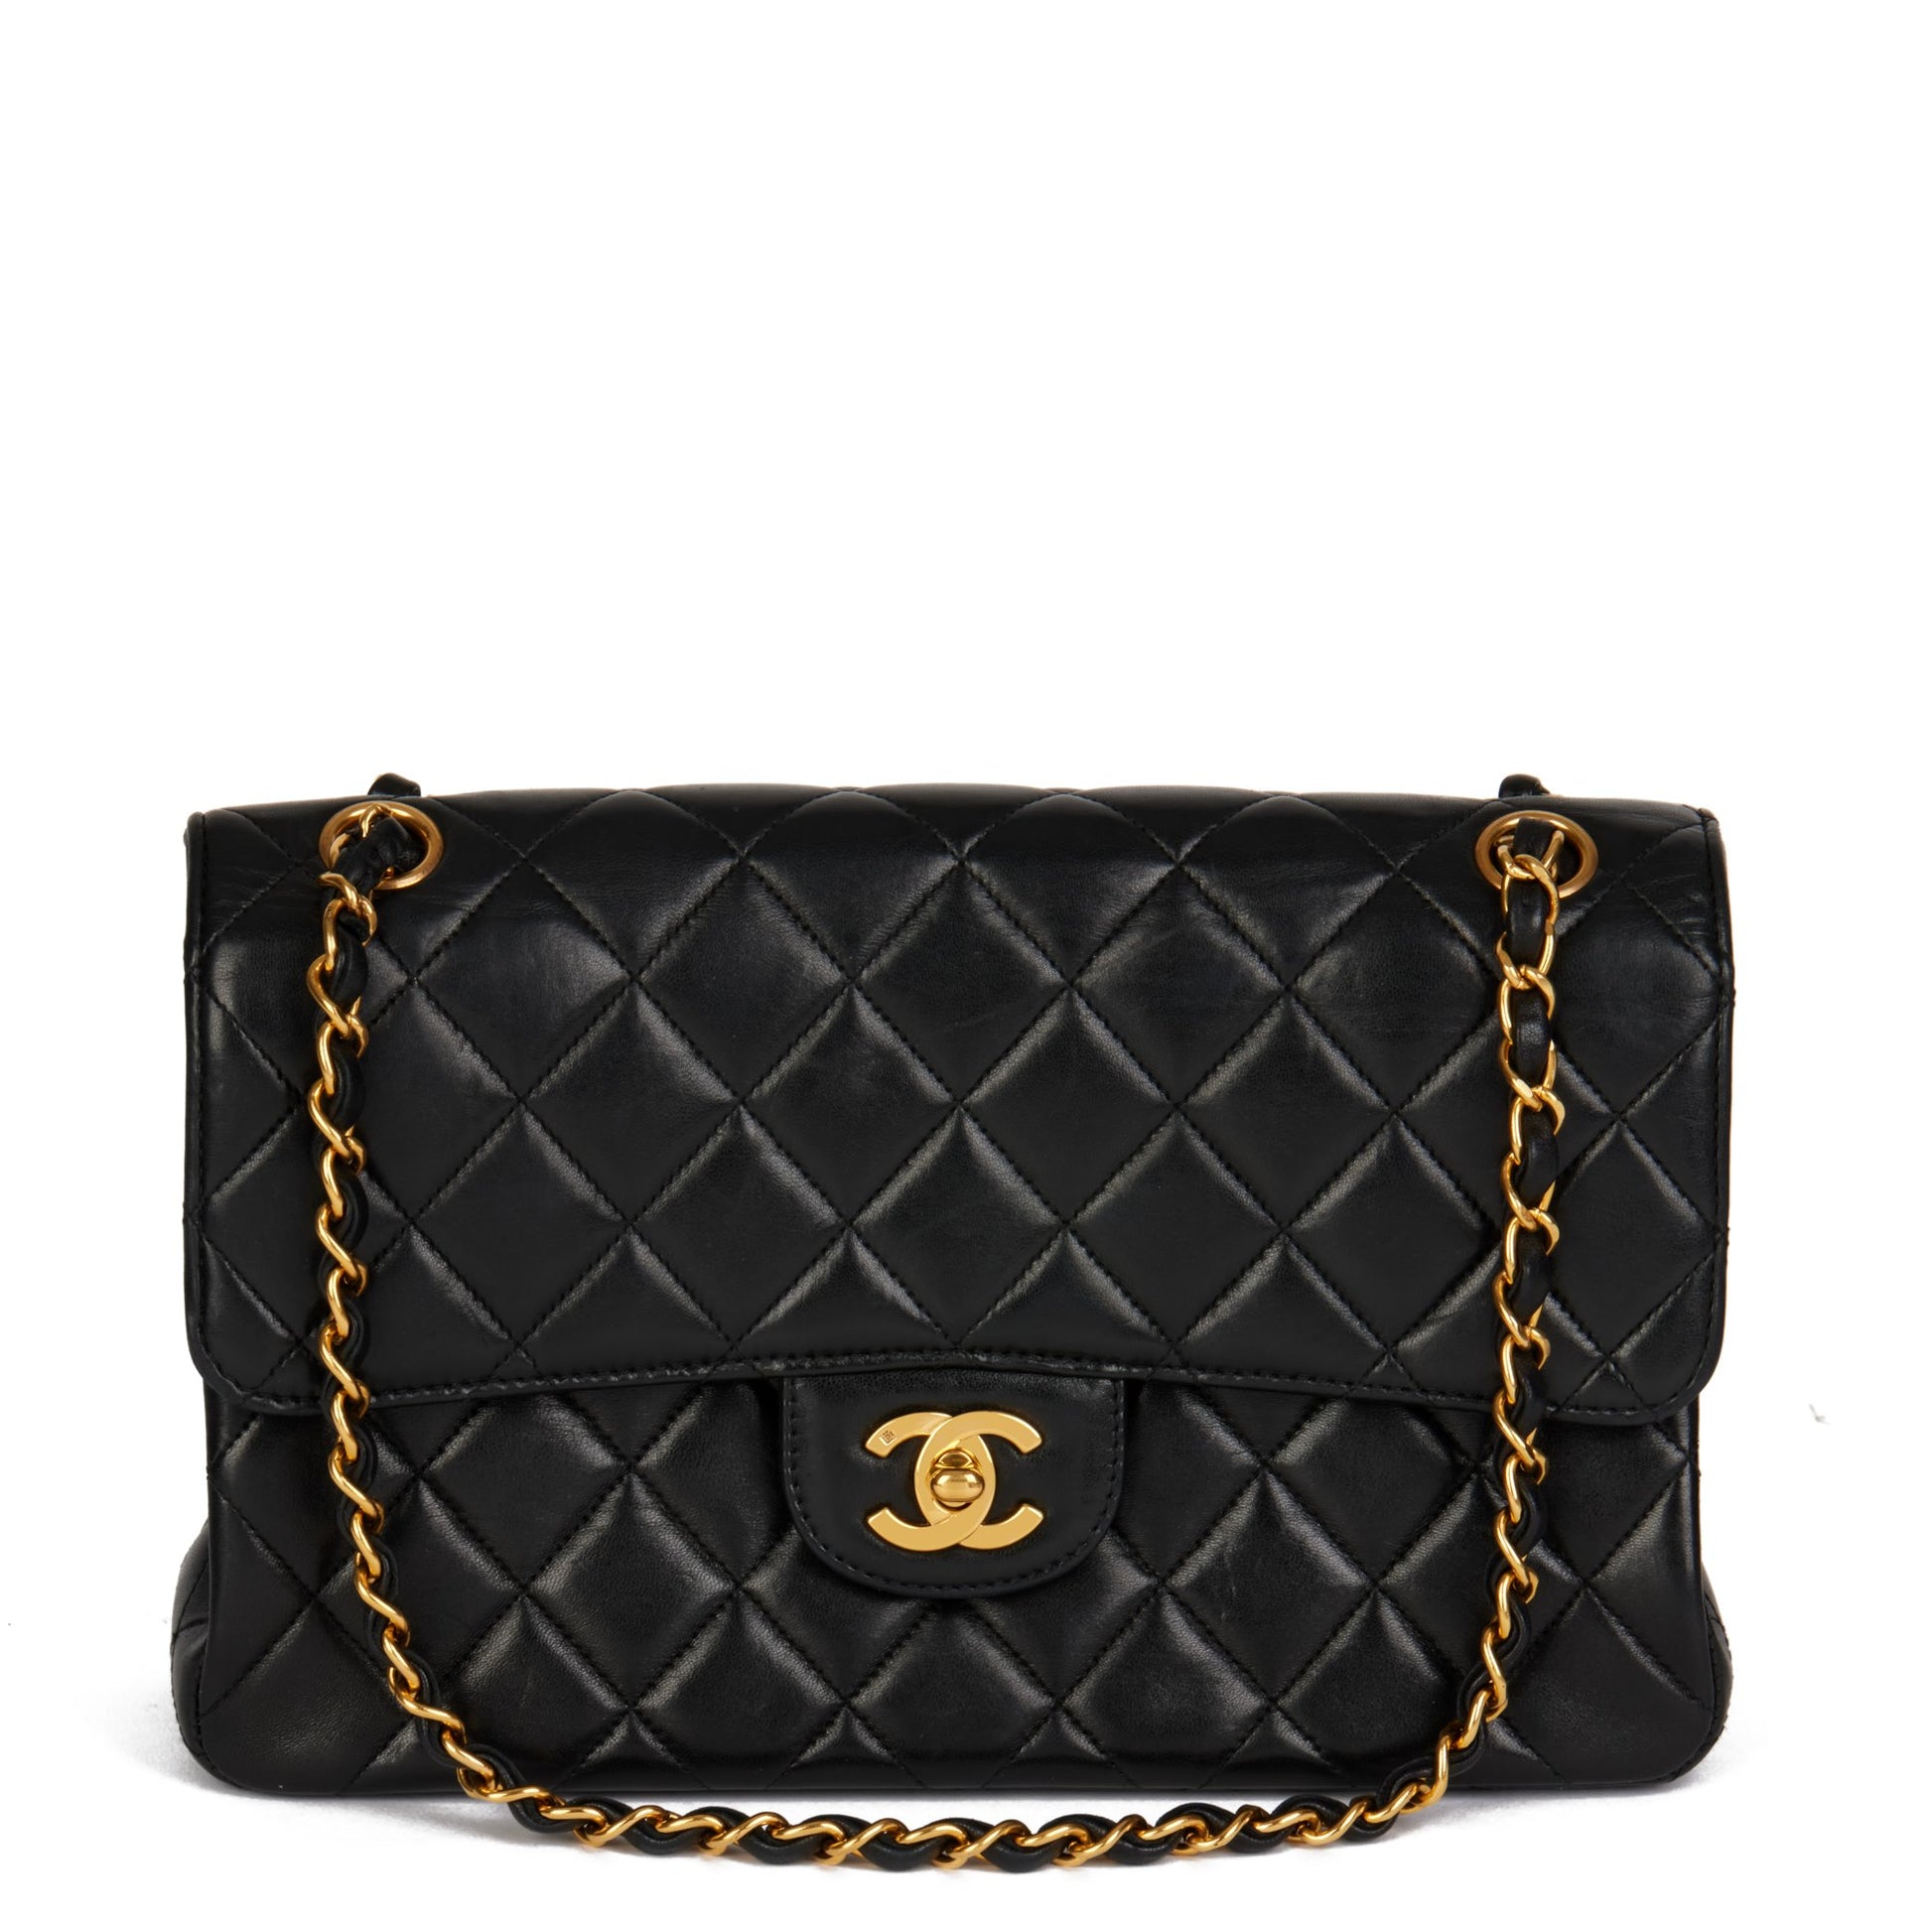 Chanel Black Quilted Lambskin Vintage Medium Double Sided Classic Flap Bag  Top Handle Bag